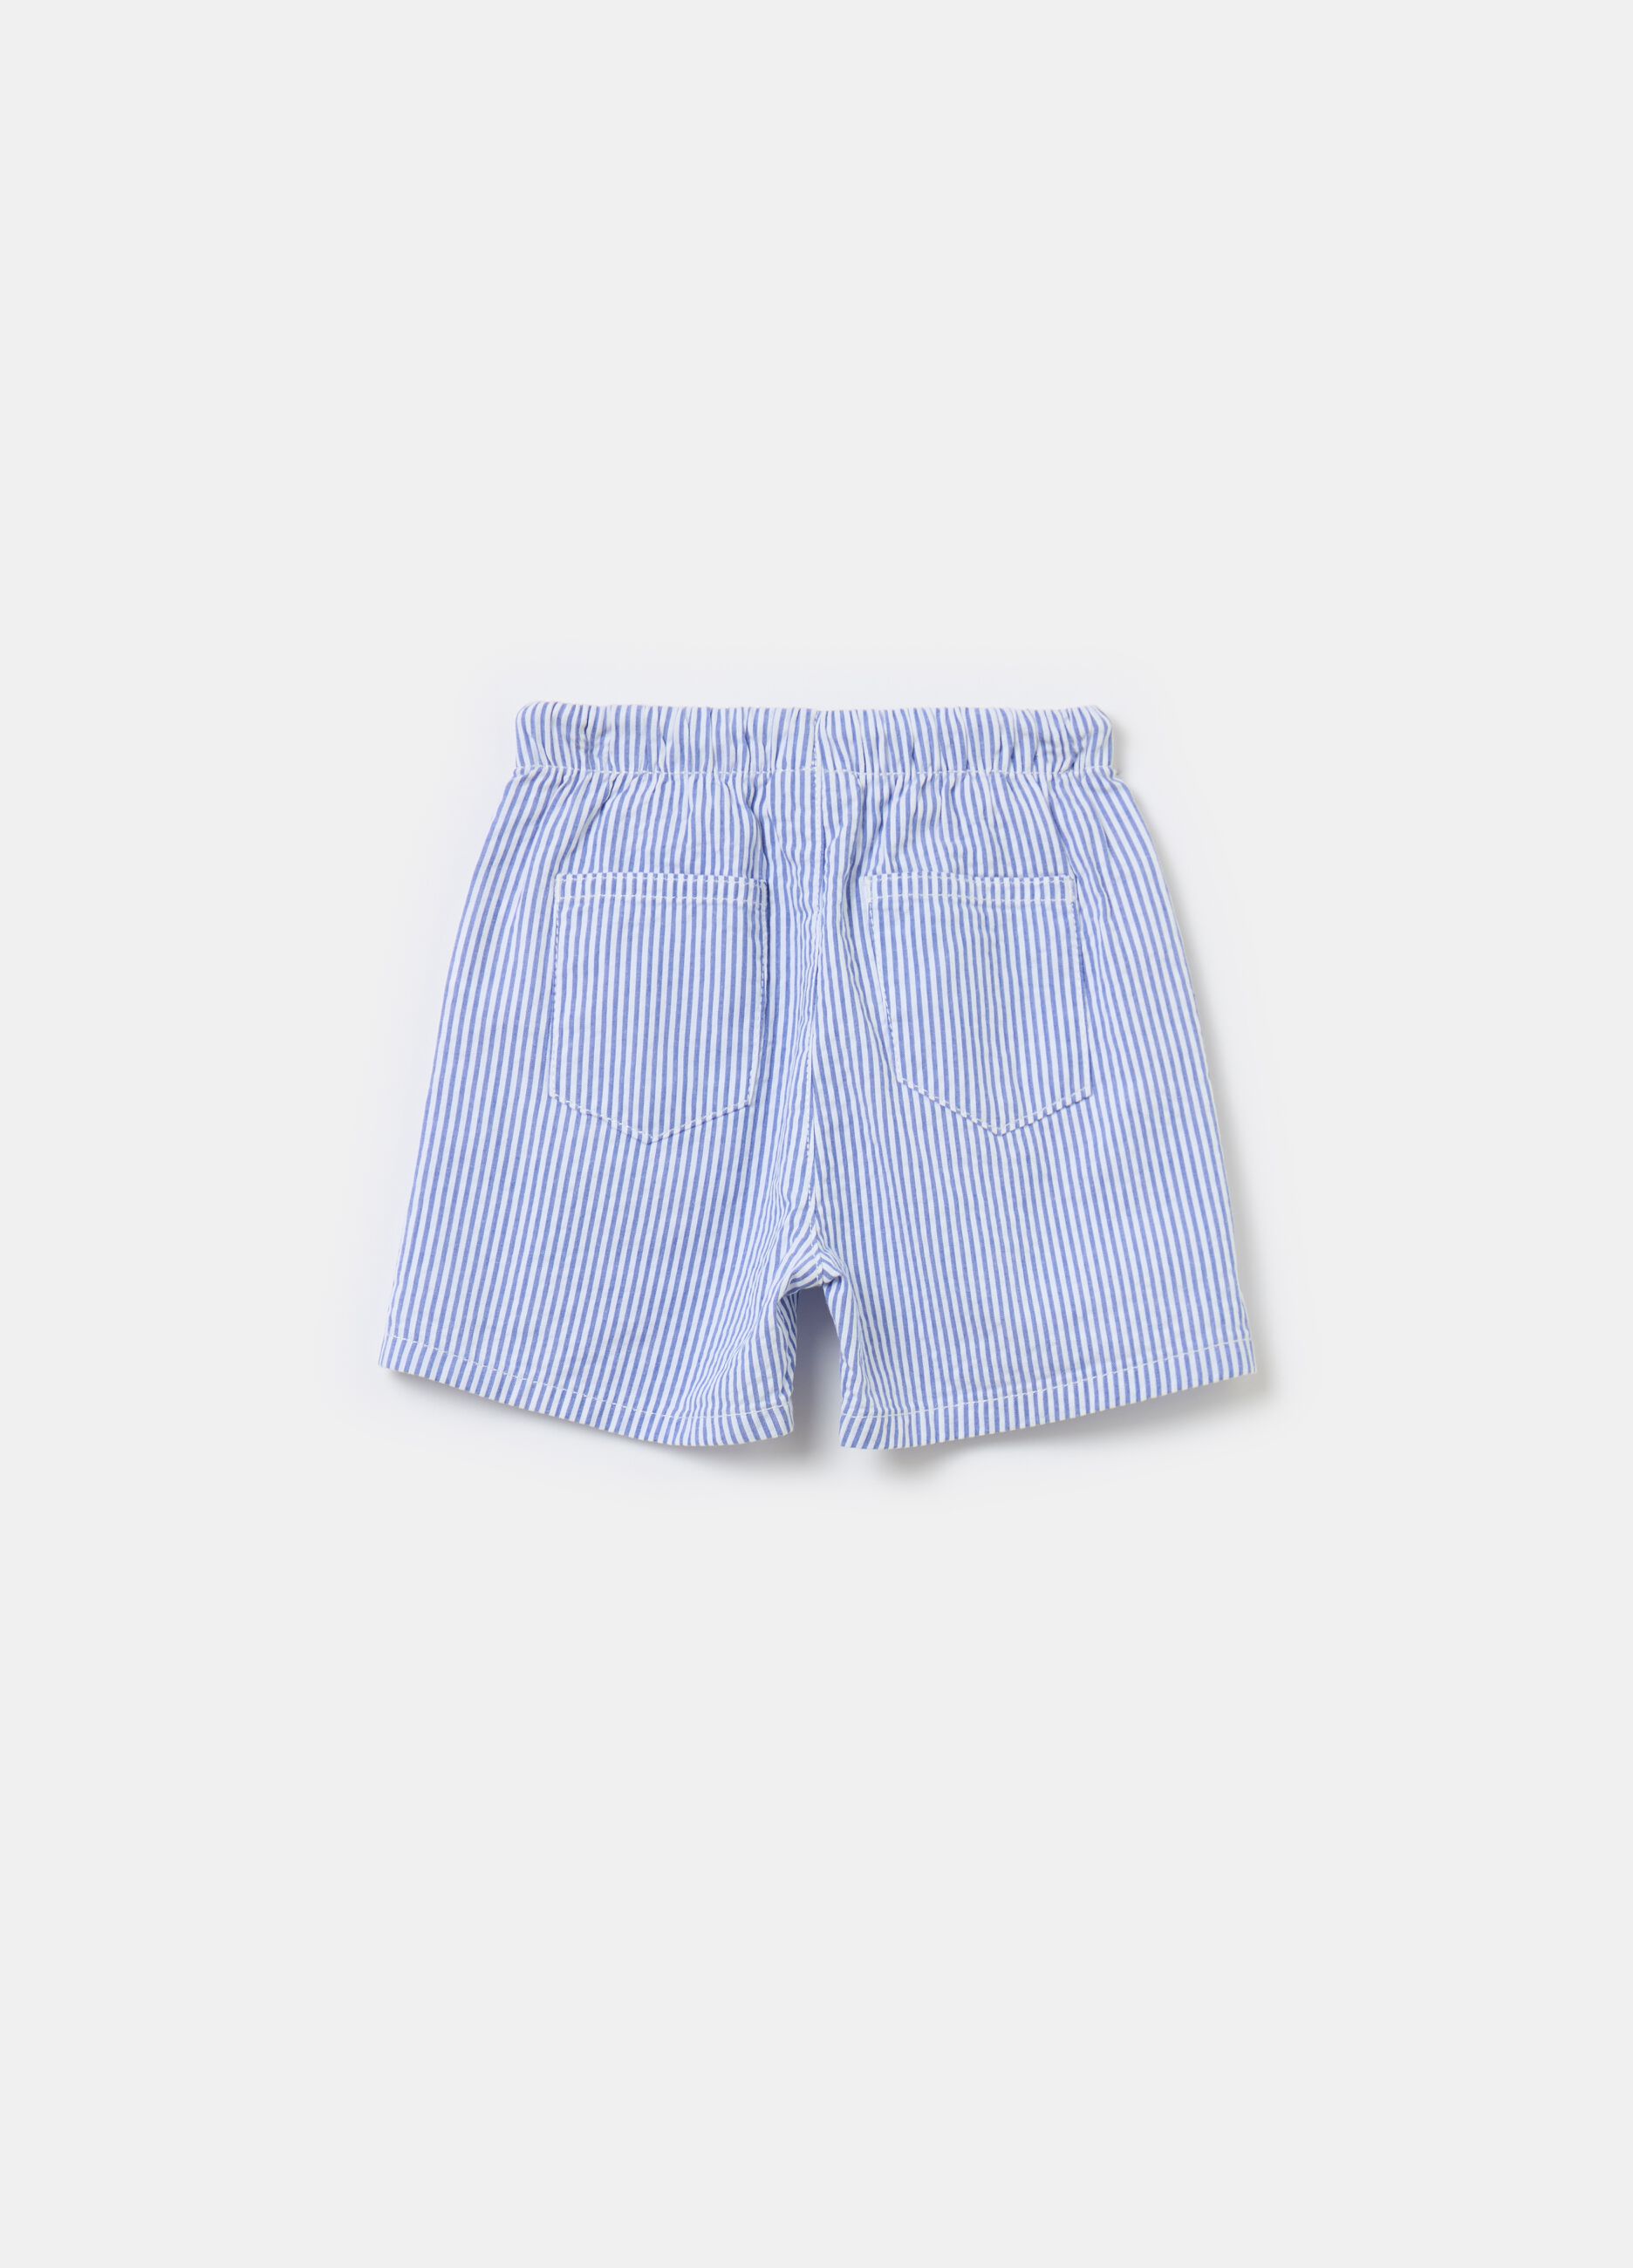 Striped cotton shorts with drawstring